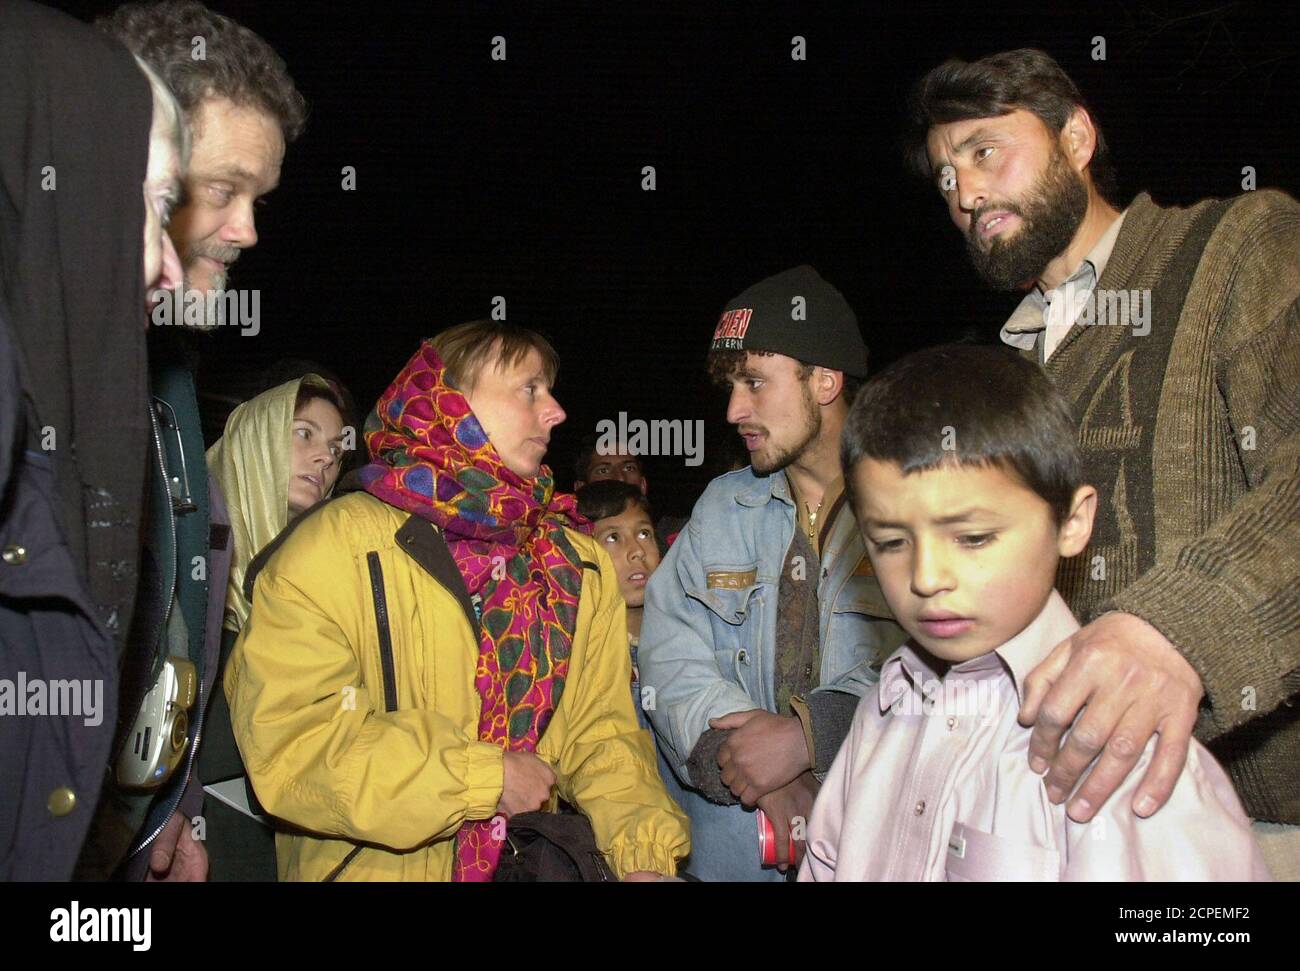 Relatives of victims of the September 11 attacks on Washington and New York, (from left) Rita Lasar, 70, Derrill Bodley, 56, Eva Rupp, 28, and Kelly Campbell, 29, are greeted by Mohammad Shaher (R) and his his son Meellad (2R) in Kabul, January 15, 2002. The Shaher family home was destroyed by a U.S. bomb and Mrs. Shaher, six months pregnant, was severly wounded. Bodley lost his daughter on United Airlines flight 93, Campbell lost her brother-in-law in the Pentagon attack, Rupp lost her step-sister in the United Airlines flight 93 and Lasar's brother was killed at the World Trade Center. Third Stock Photo